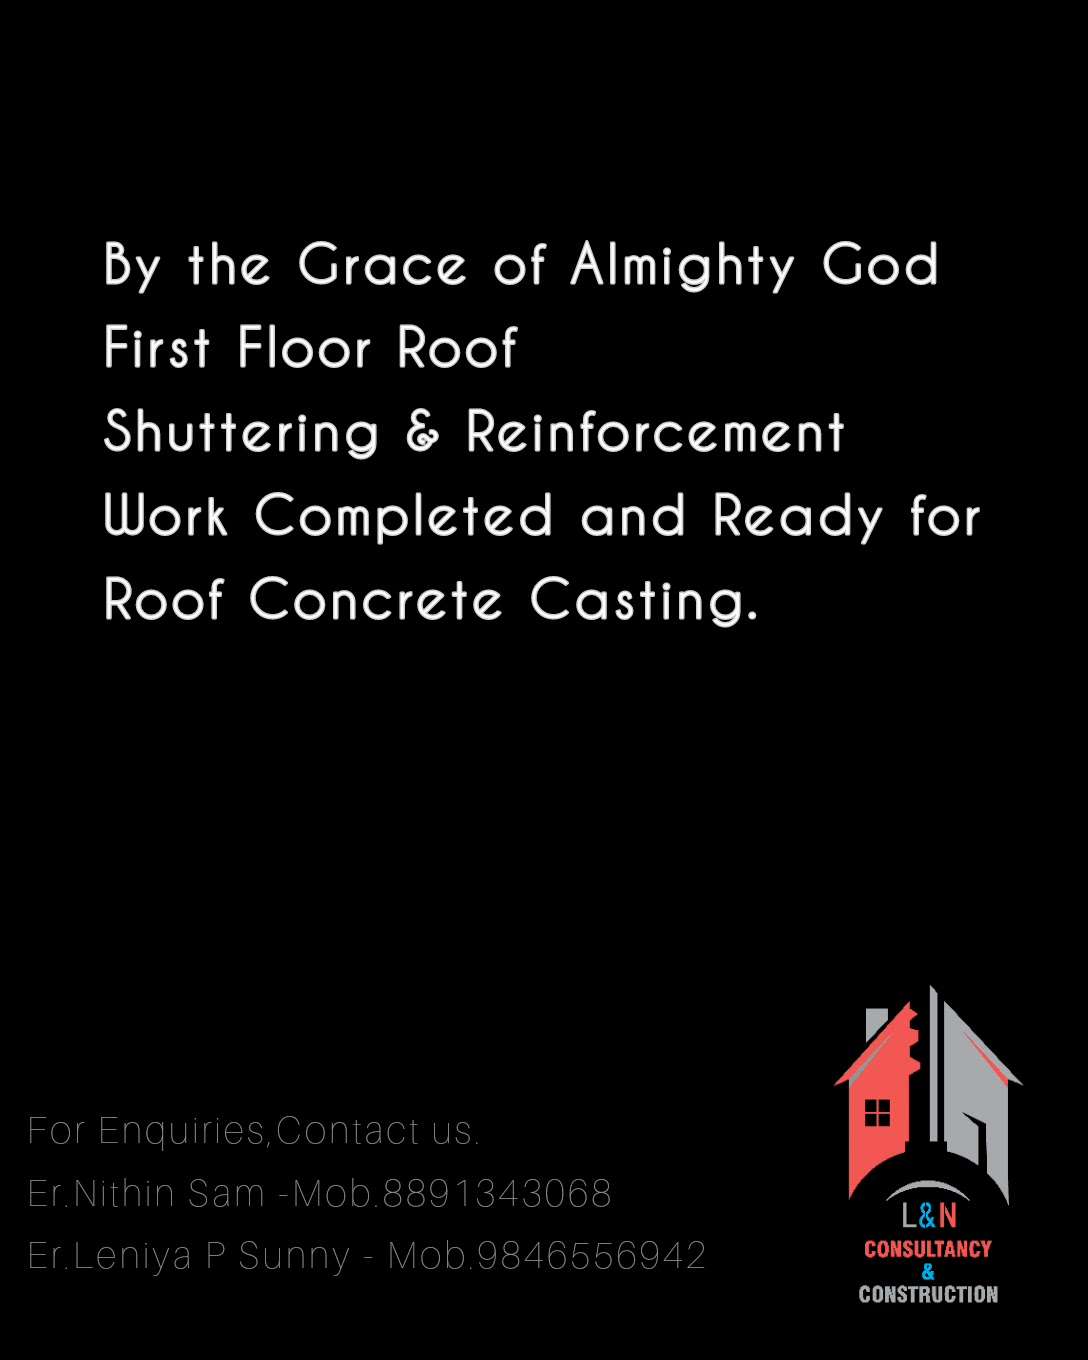 By the Grace of Almighty God shuttering work completed and ready for Concrete Casting @ #uthimood #kumplapoika #Pathanamthitta #site.

#shuttring #reinforcement #Completed #HouseRenovation #Firstfloor #concrete #Best_designe #BestBuildersInKerala #bestbuildersinpathanamthitta #bestconsultancy #bestcontractors #turnkey #Ongoing_project